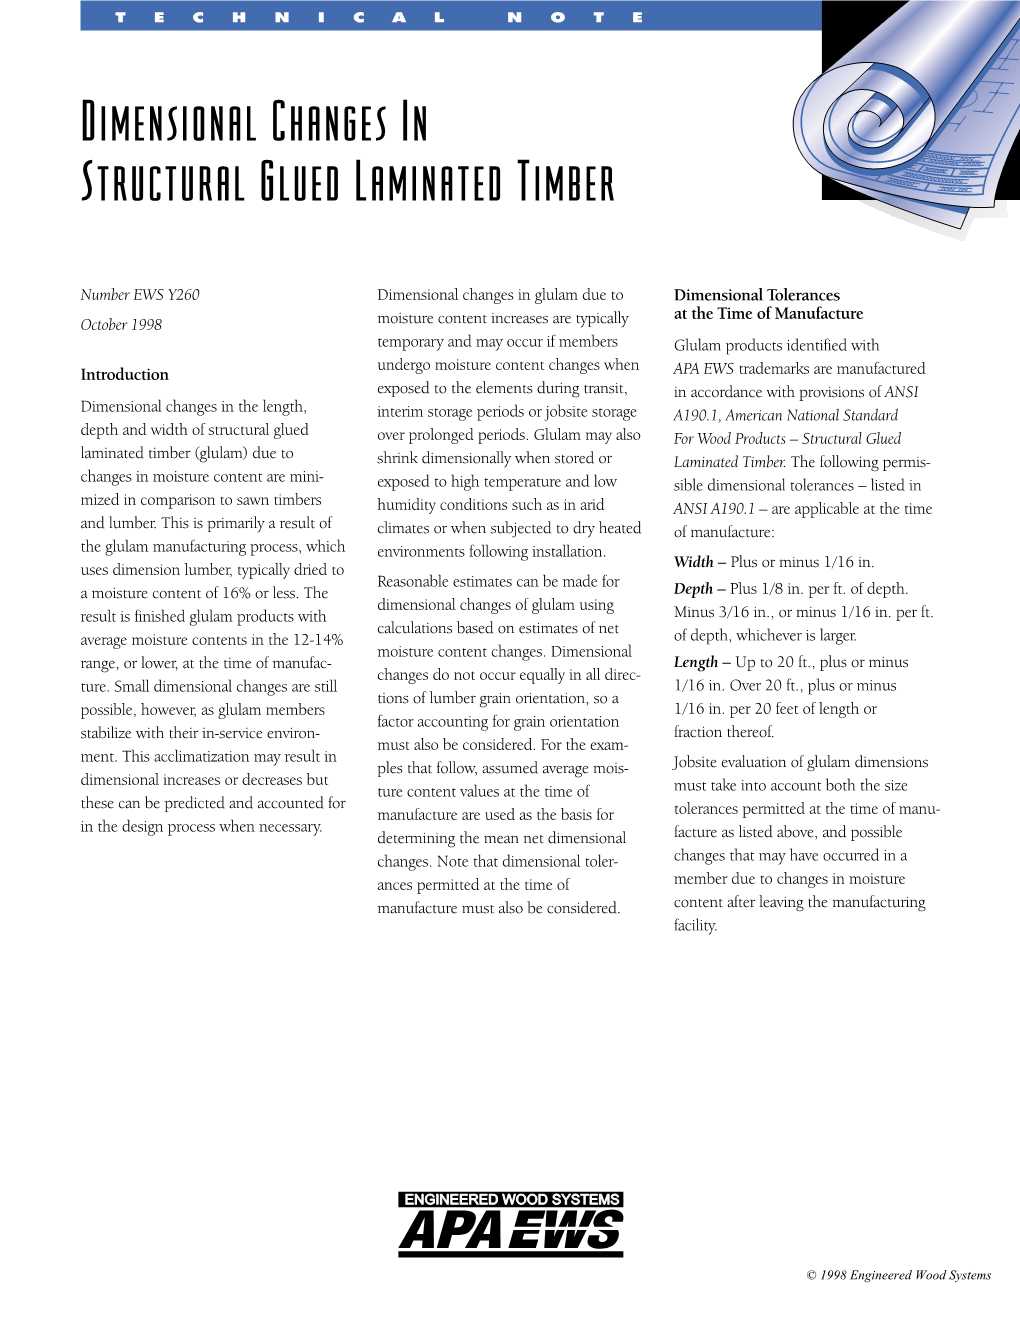 Dimensional Changes in Structural Glued Laminated Timber